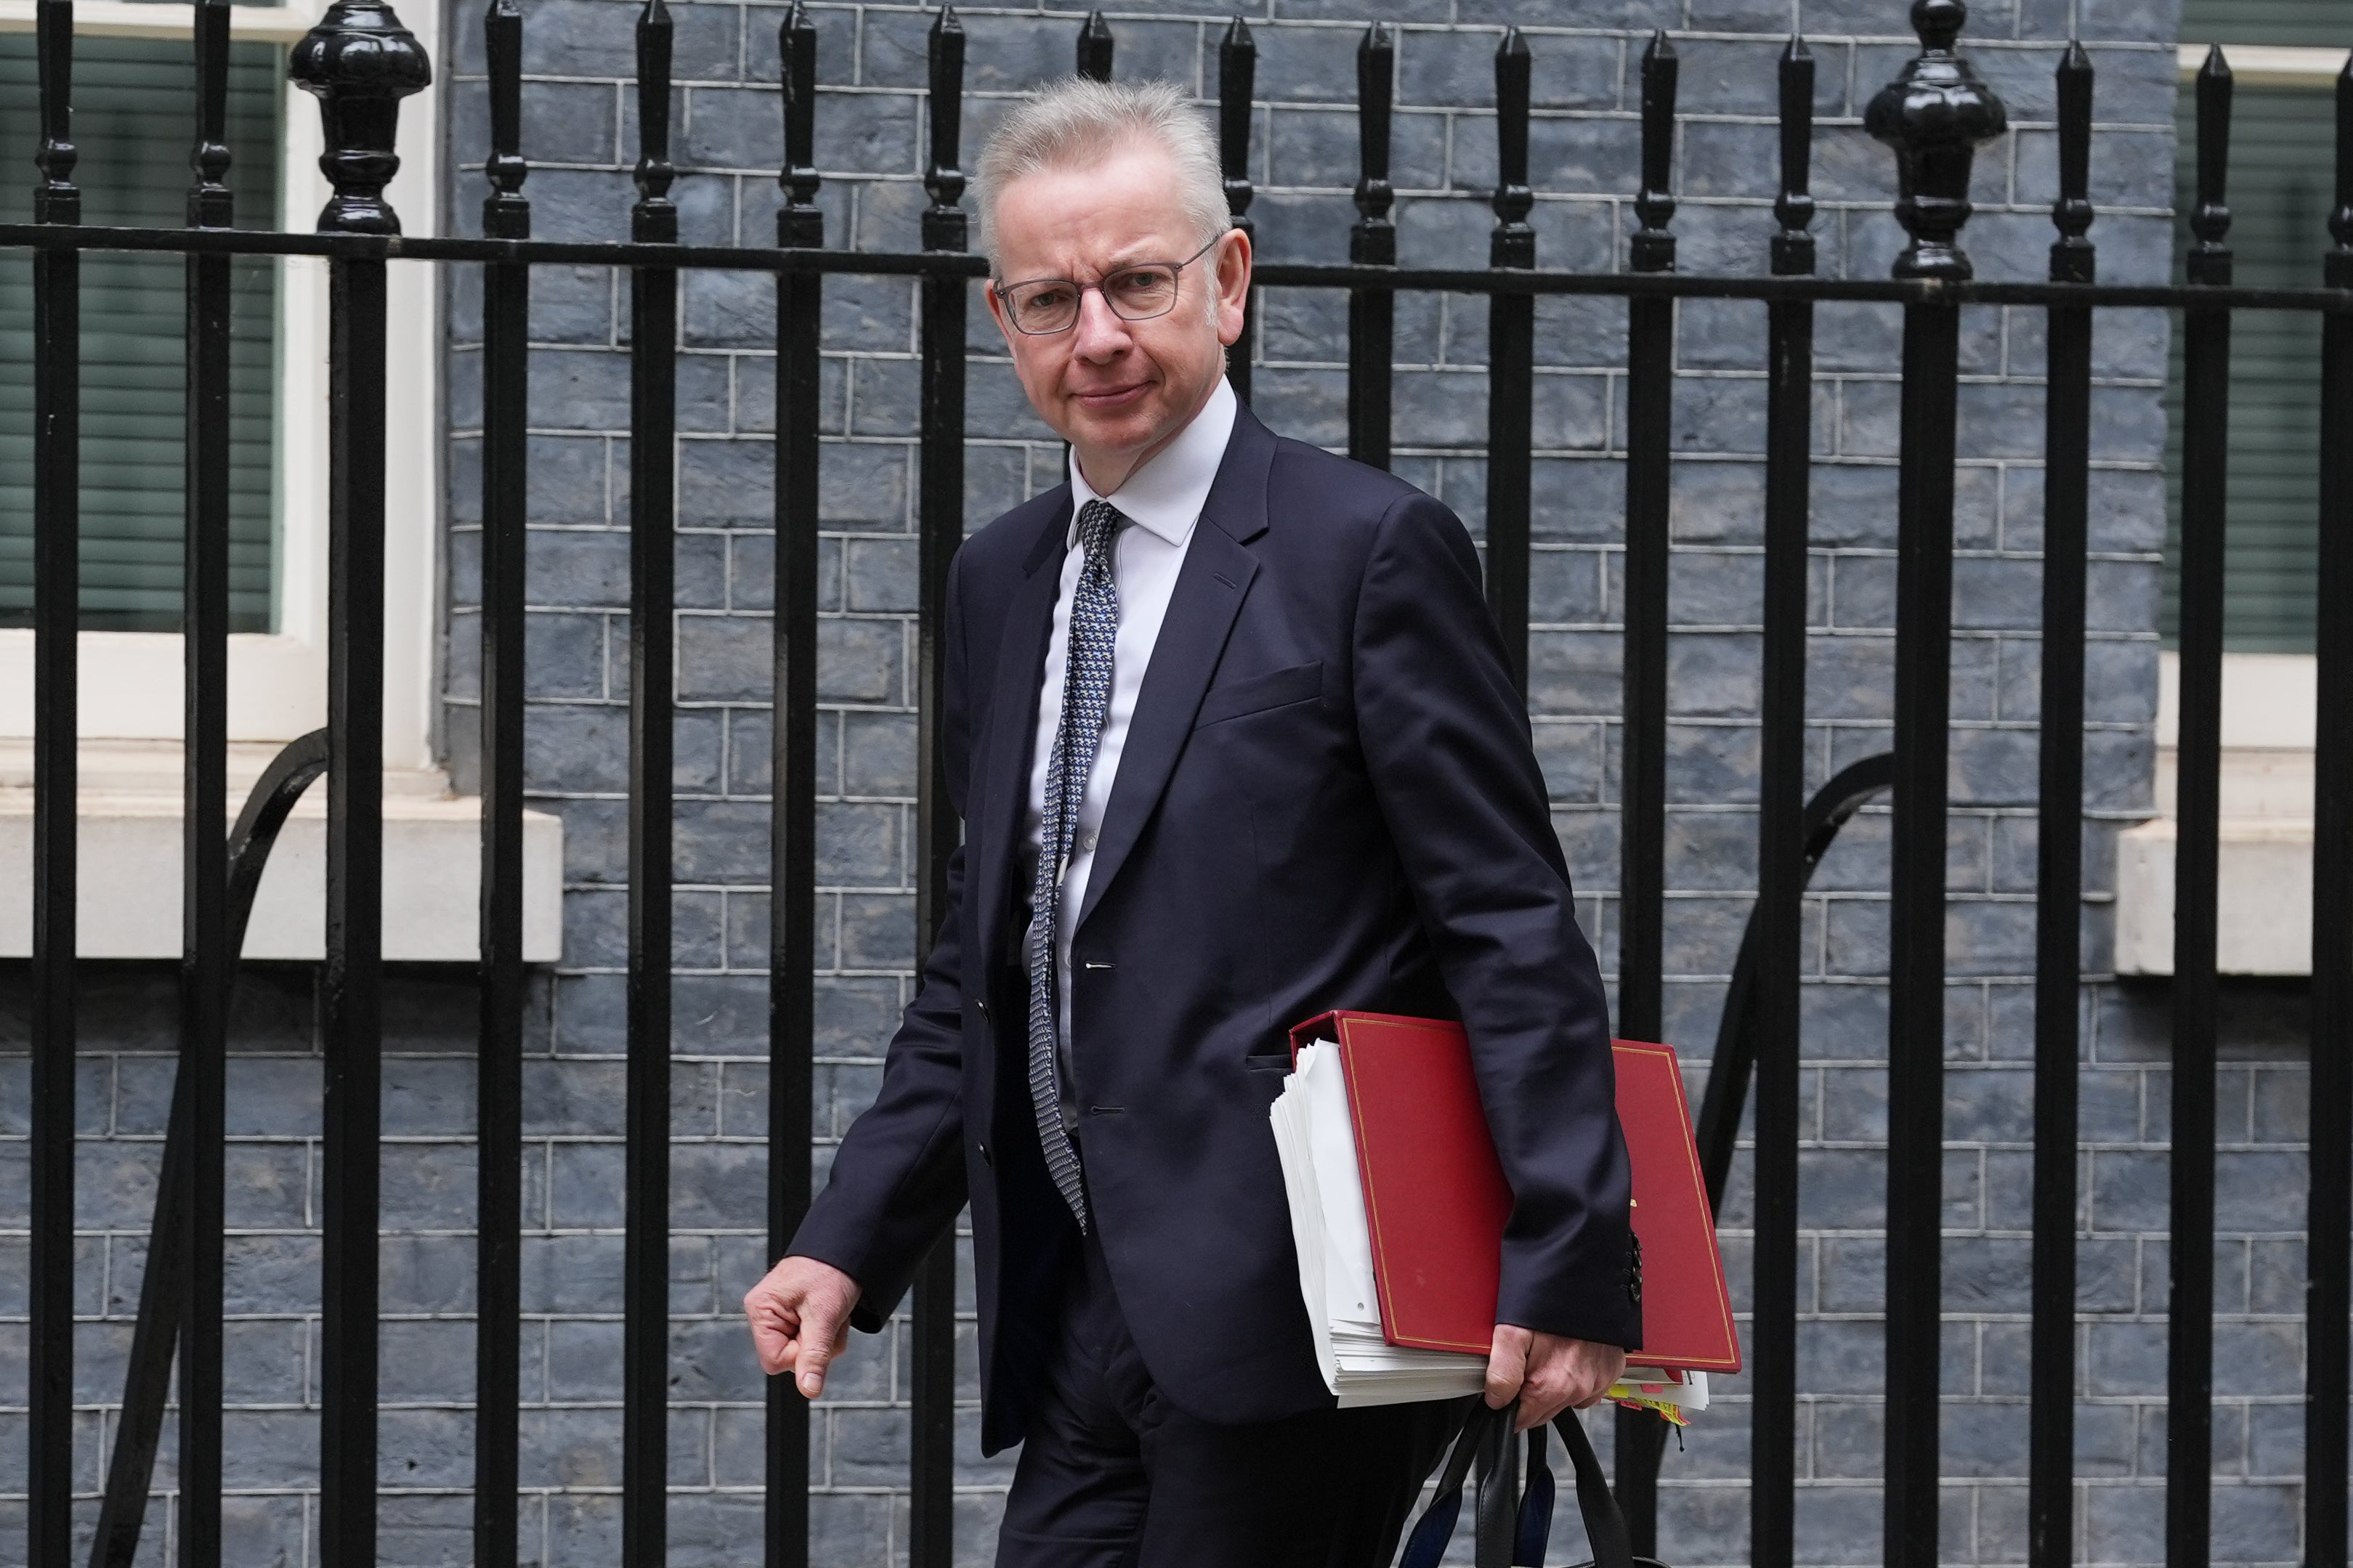 Michael Gove is quitting as an MP